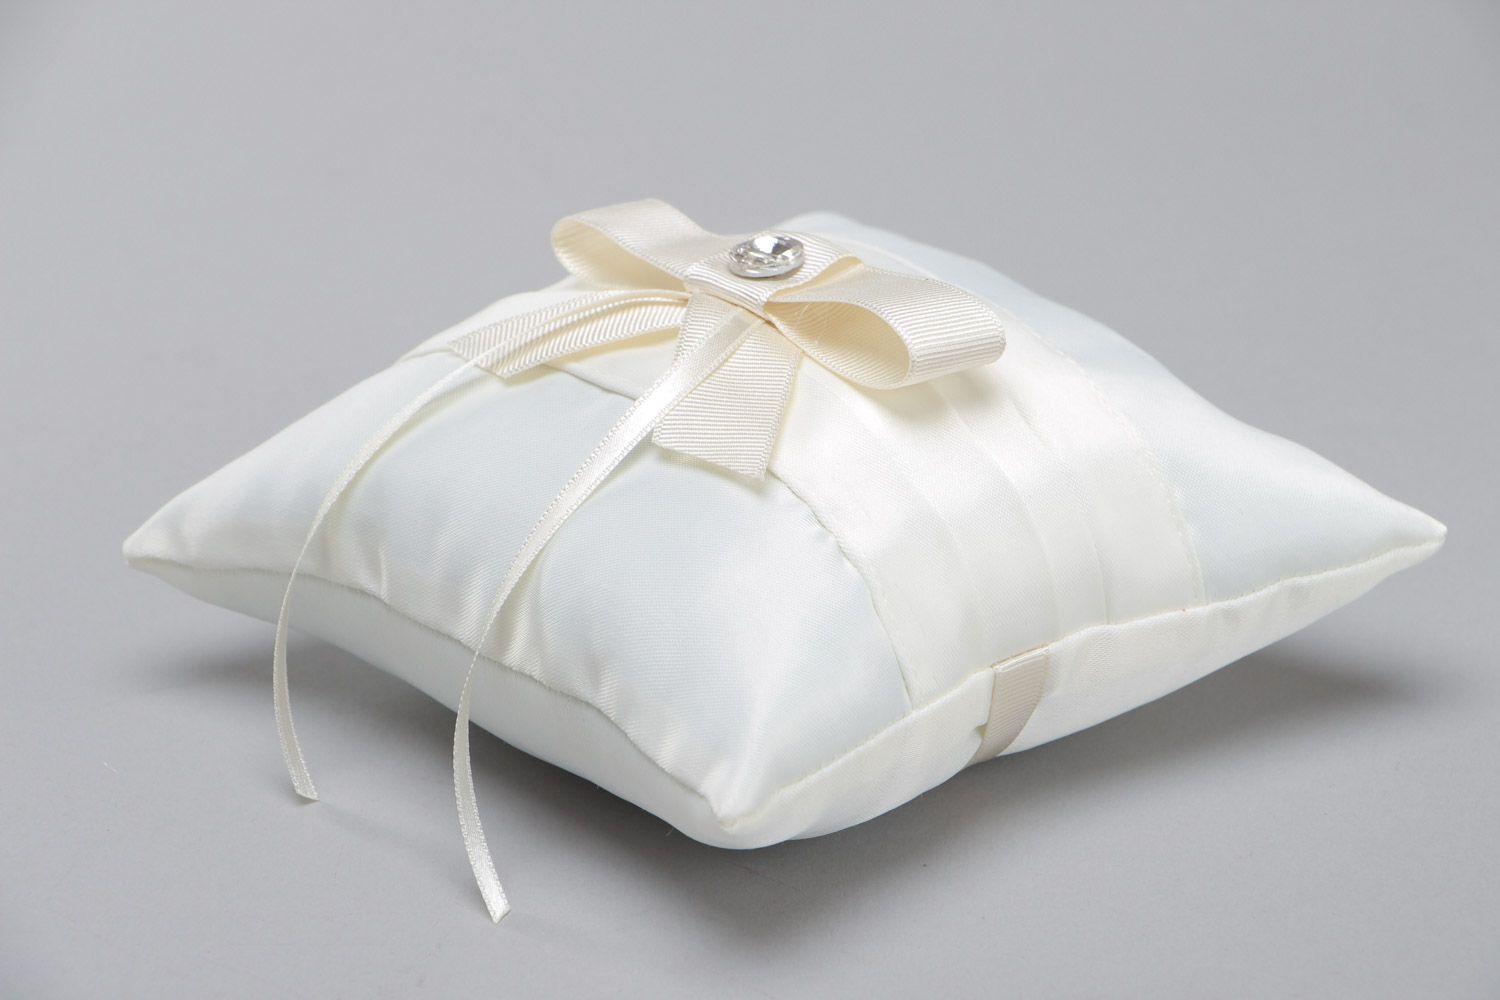 Tender handmade wedding ring pillow sewn of ivory-colored satin fabric with bow photo 3